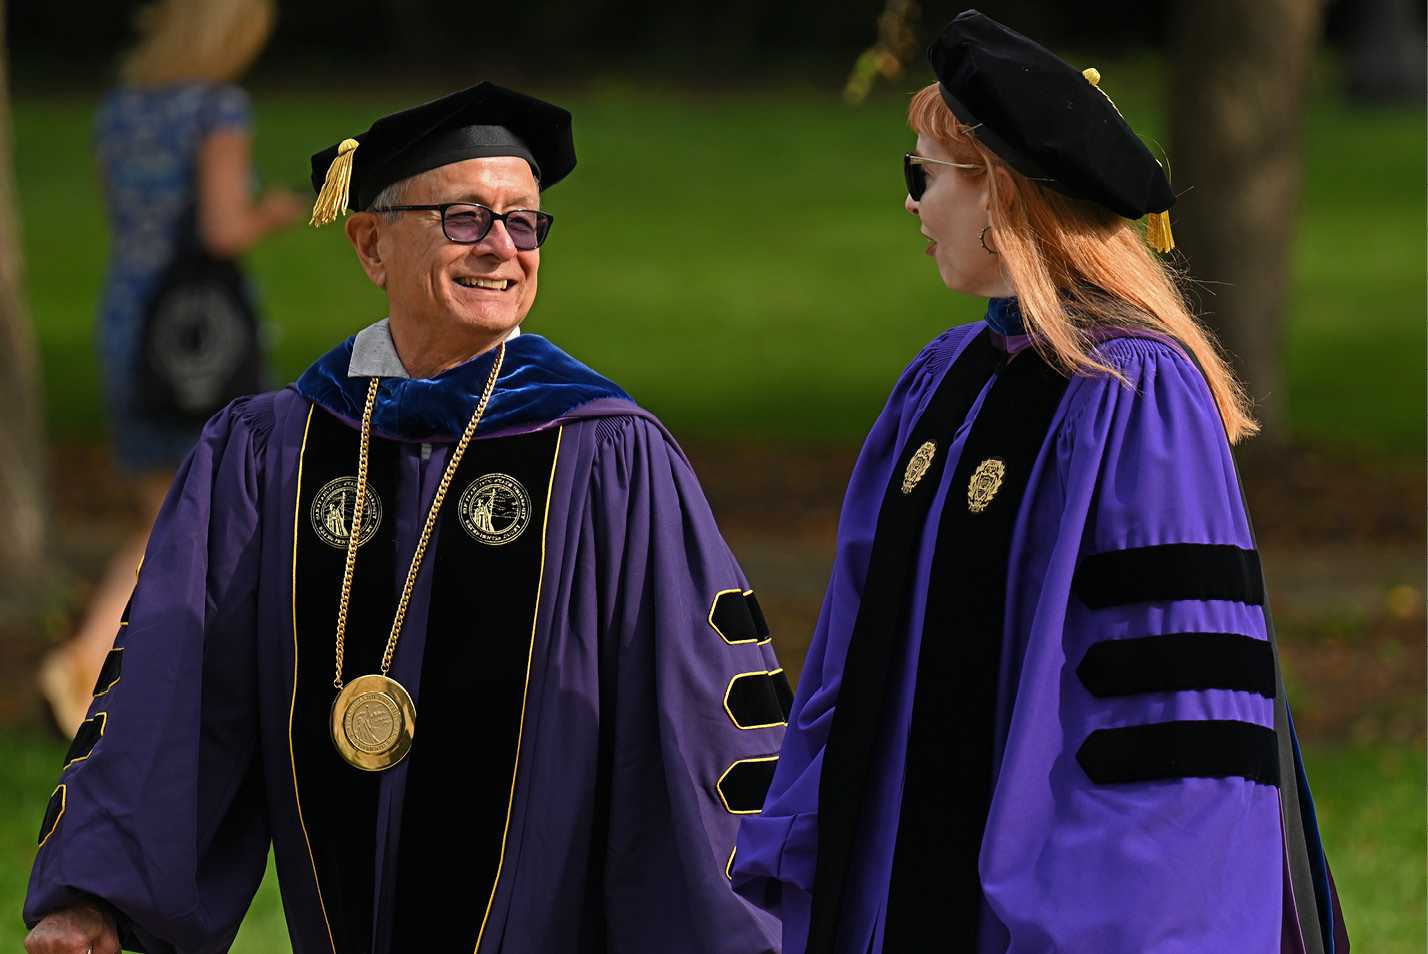 Interim President Wong walks with Dean of the Faculty Danielle Egan at Convocation